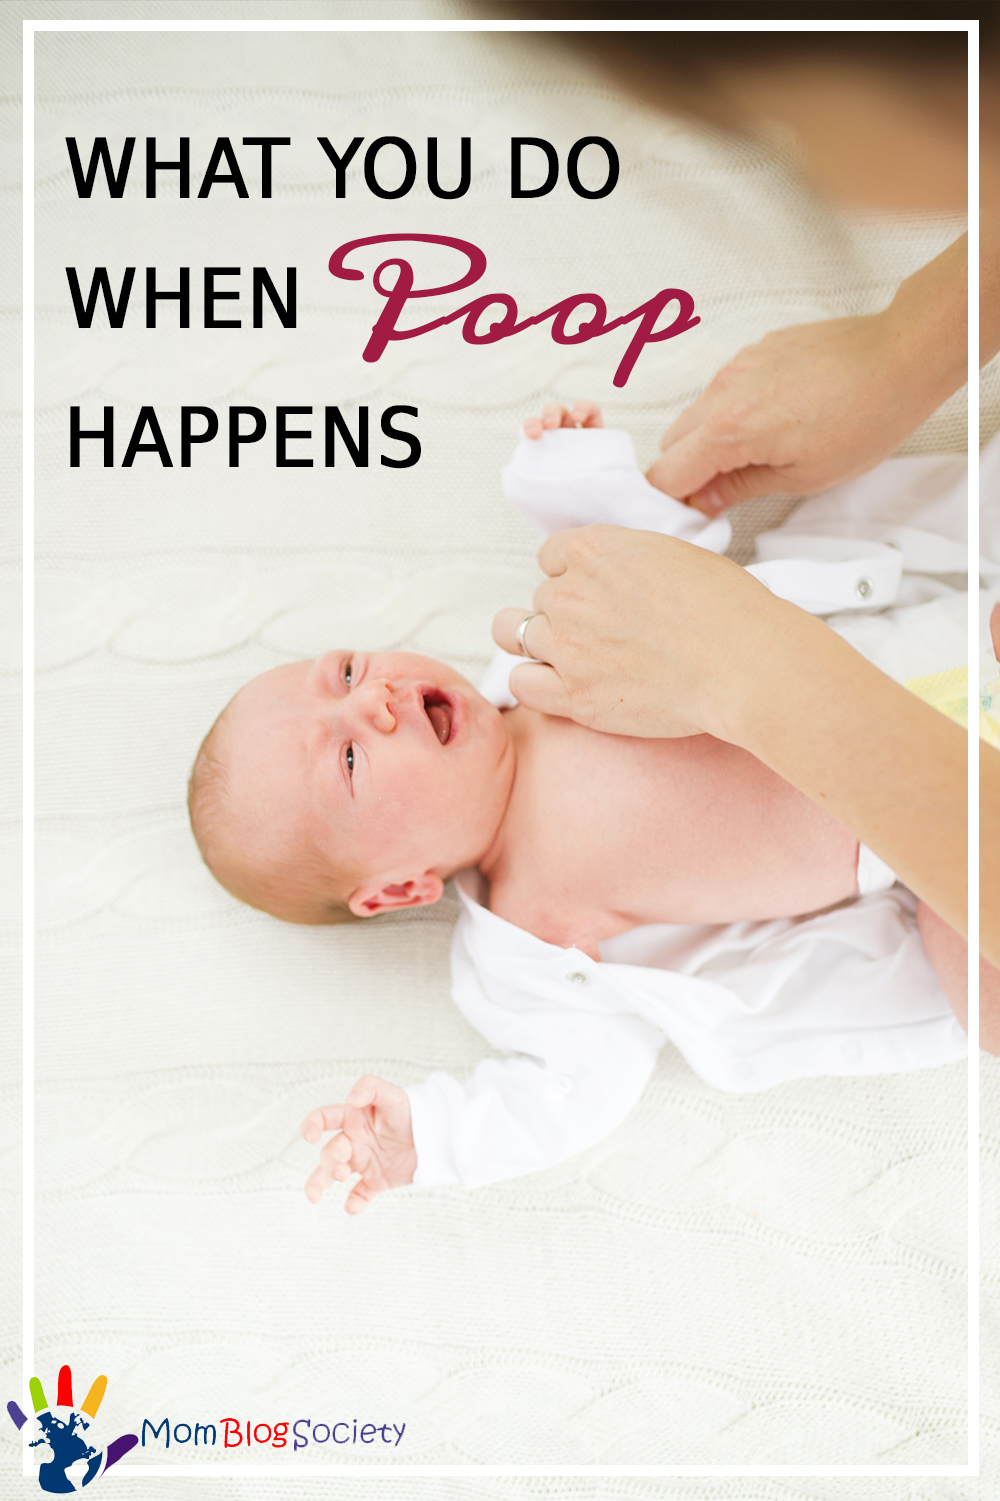 Poop Happens - It's Not a Matter of If, It's a Matter of When!